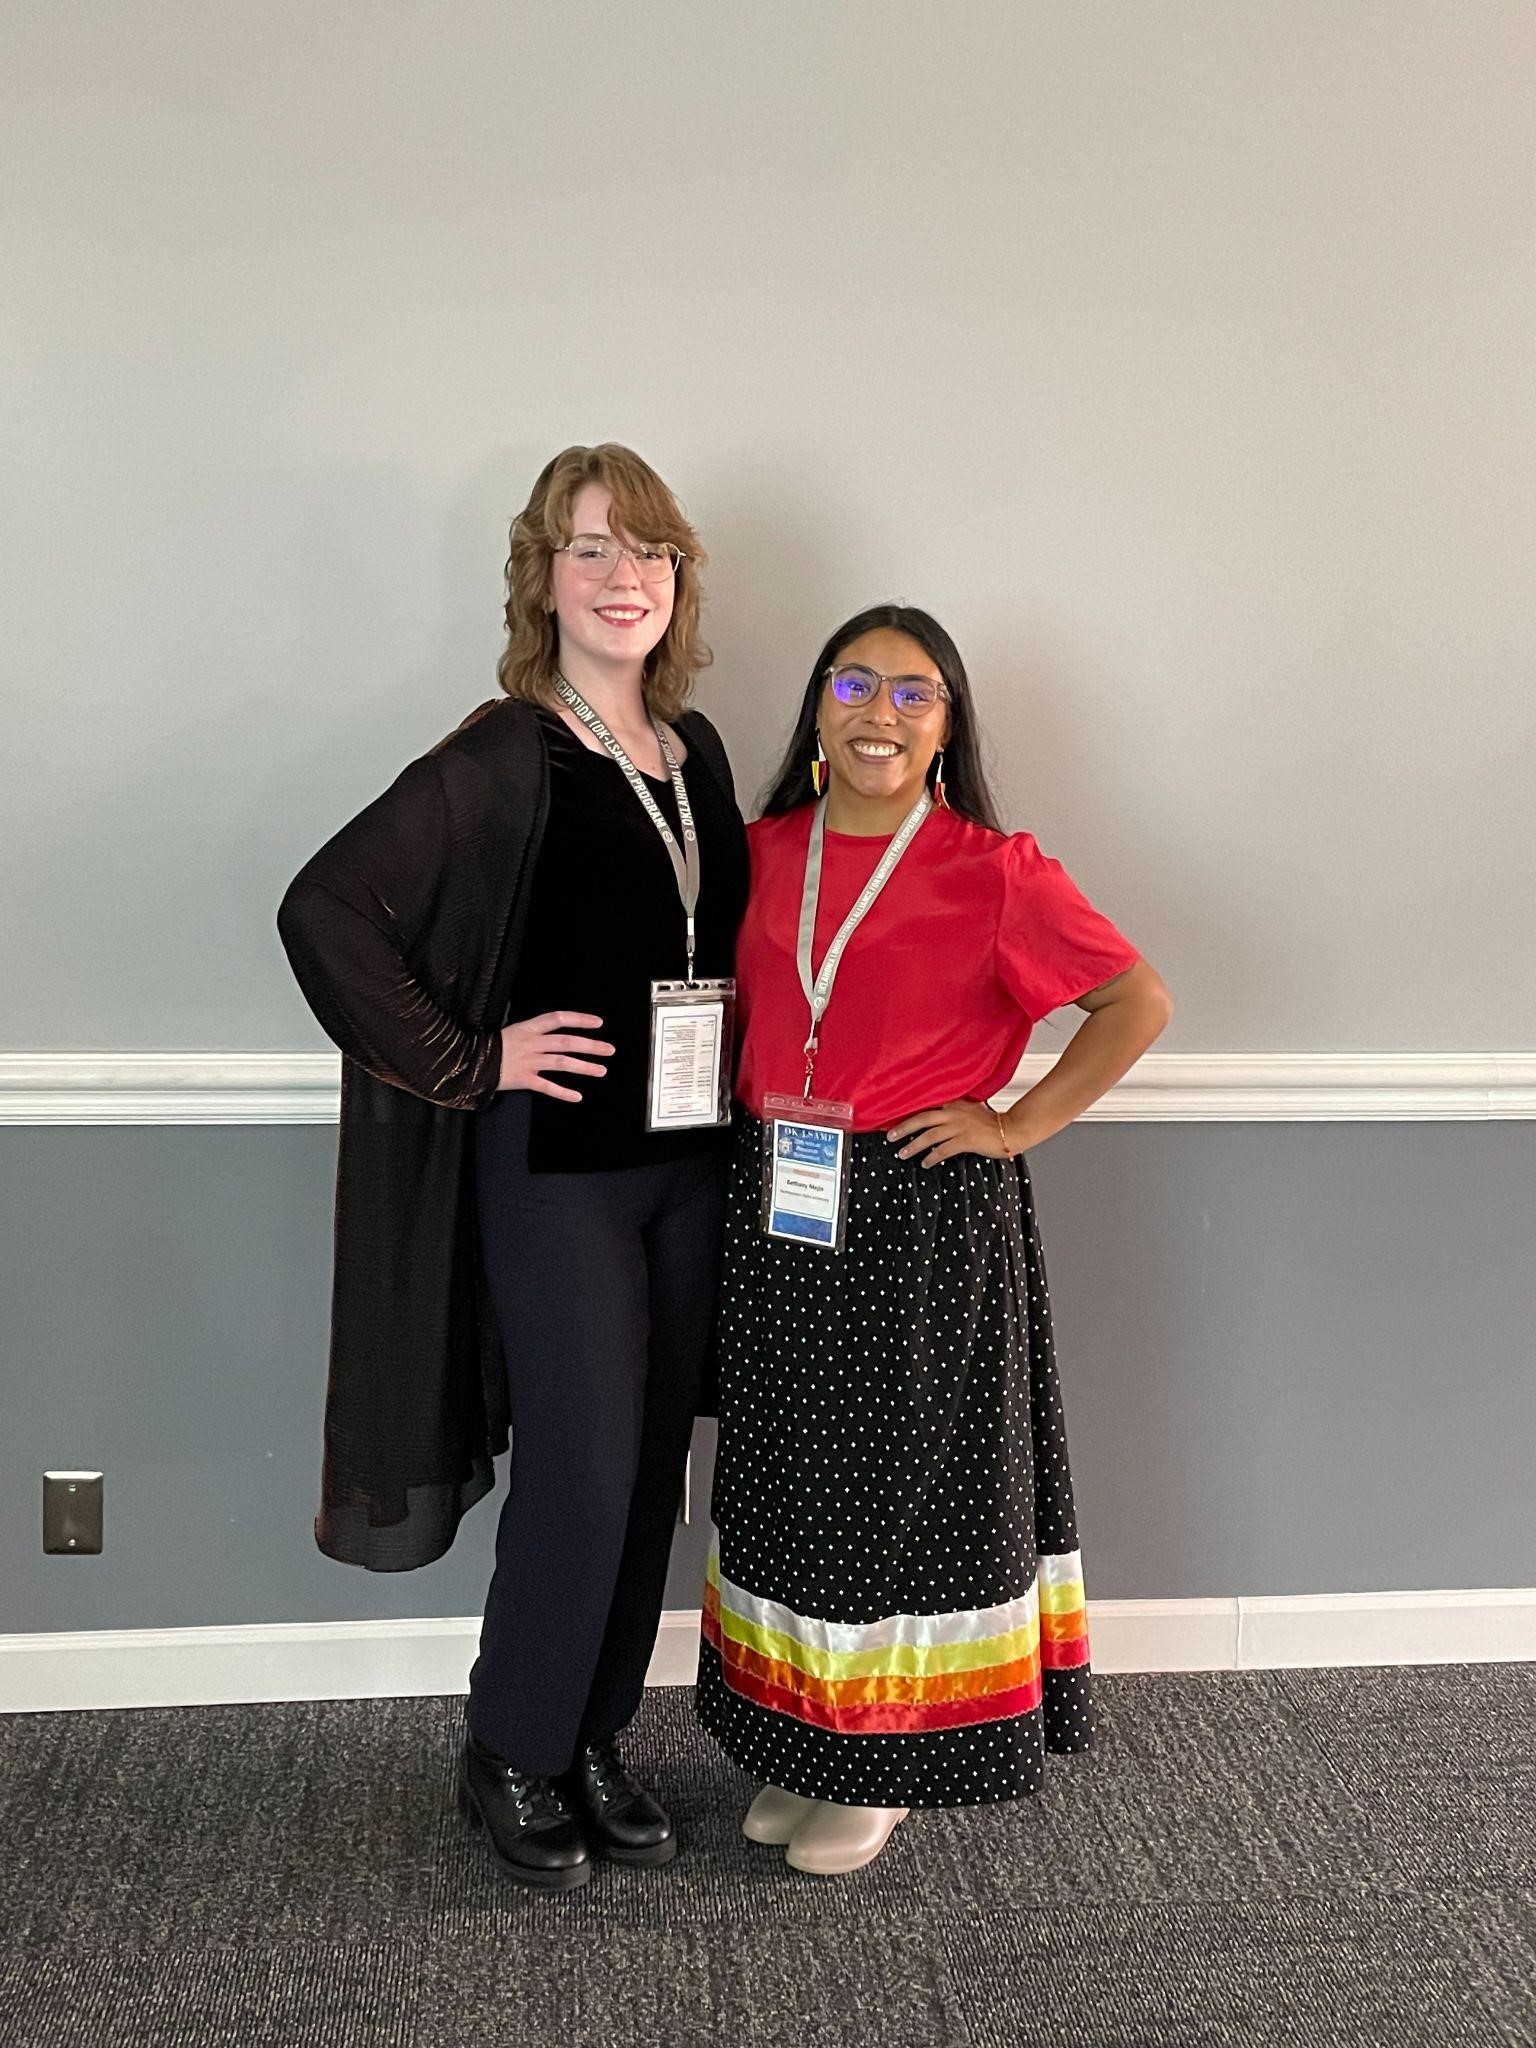 Anne Martin (left) and Bethany Mejia (right), undergraduate researchers in Dr. Valdez's lab, both gave oral presentations on their undergraduate research.